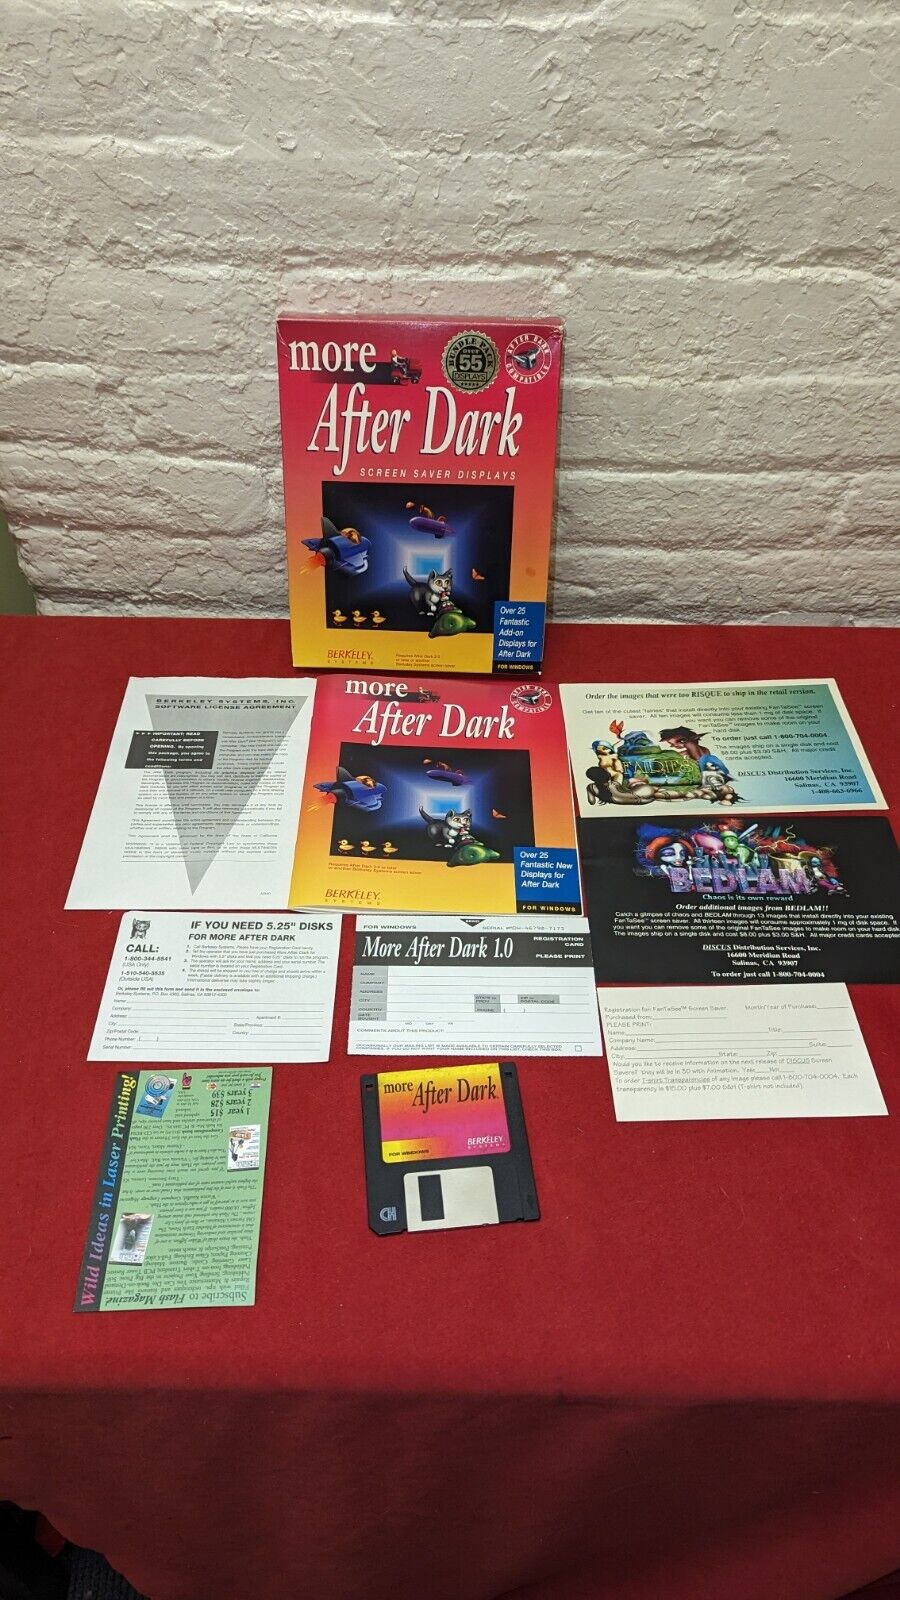 More After Dark Display For Microsoft Windows Computer Screen Saver Software 